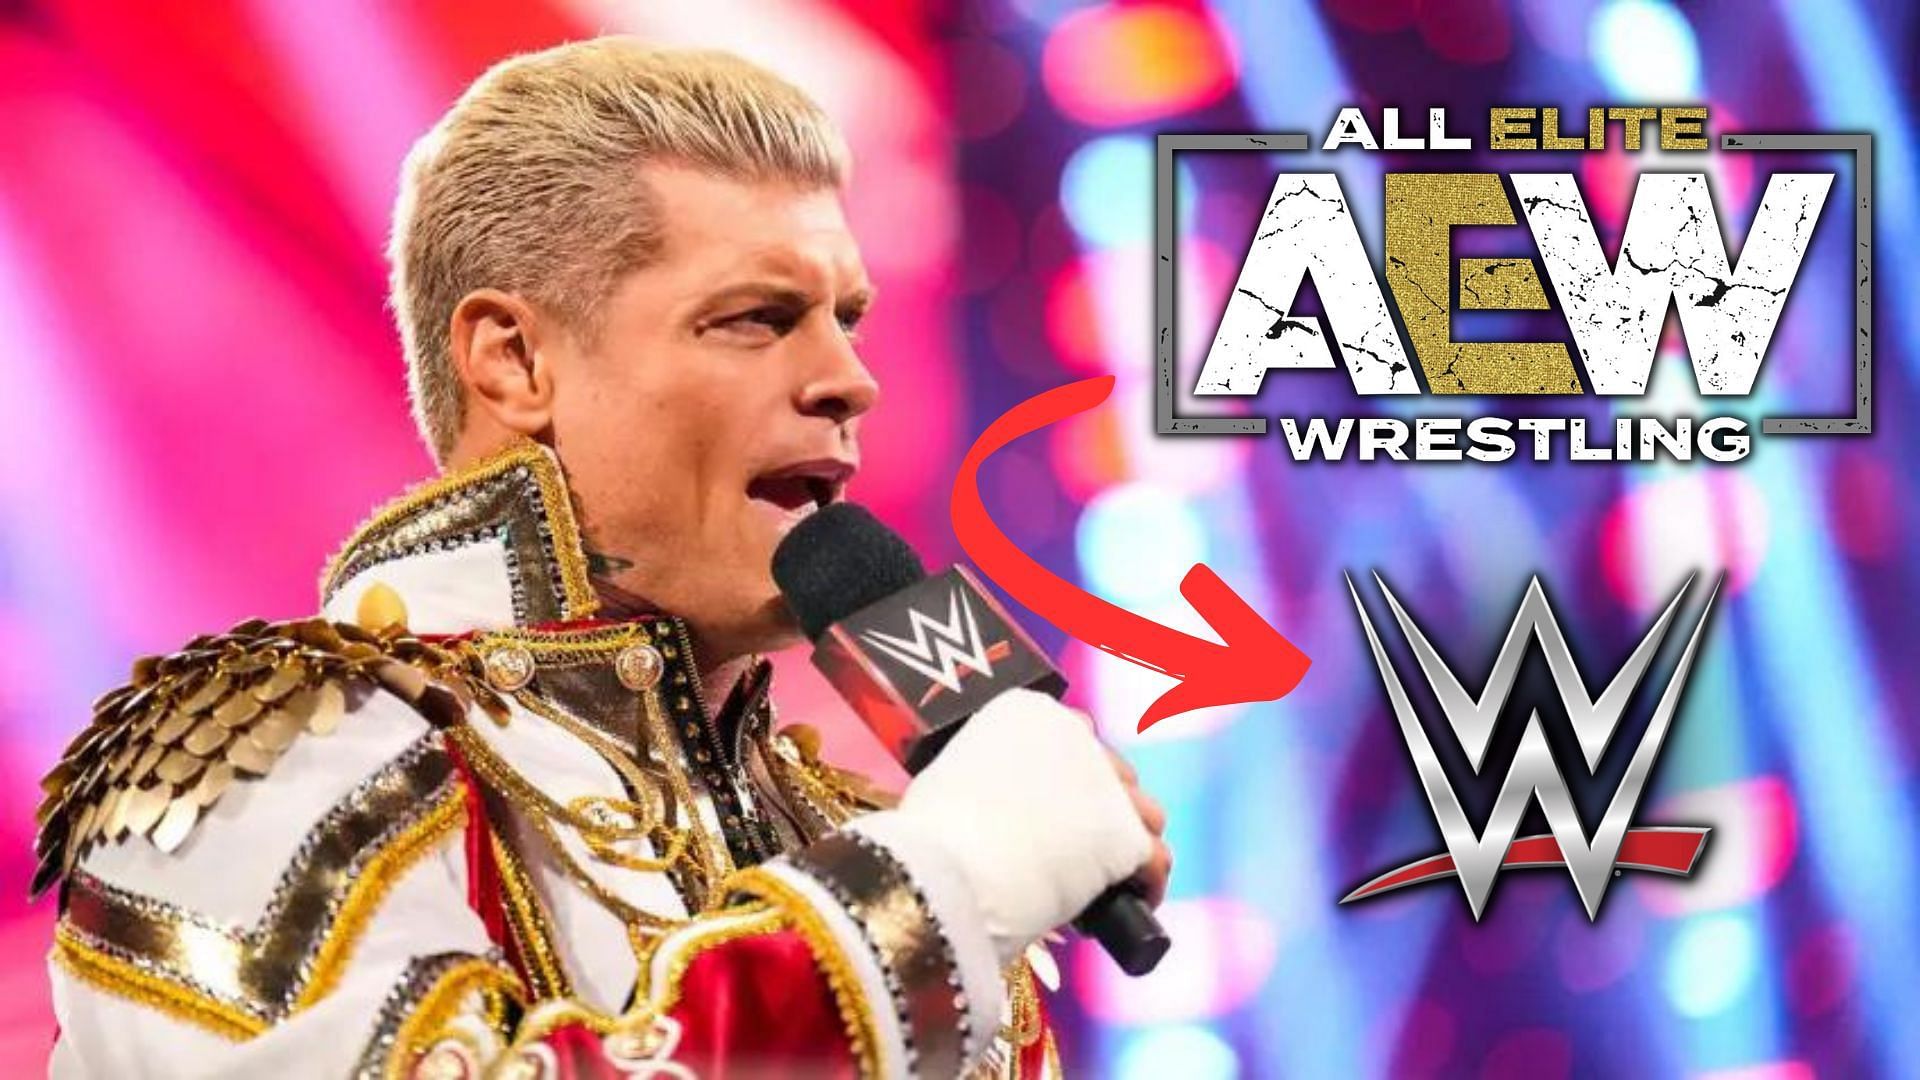 Cody Rhodes had some interesting things to say this week